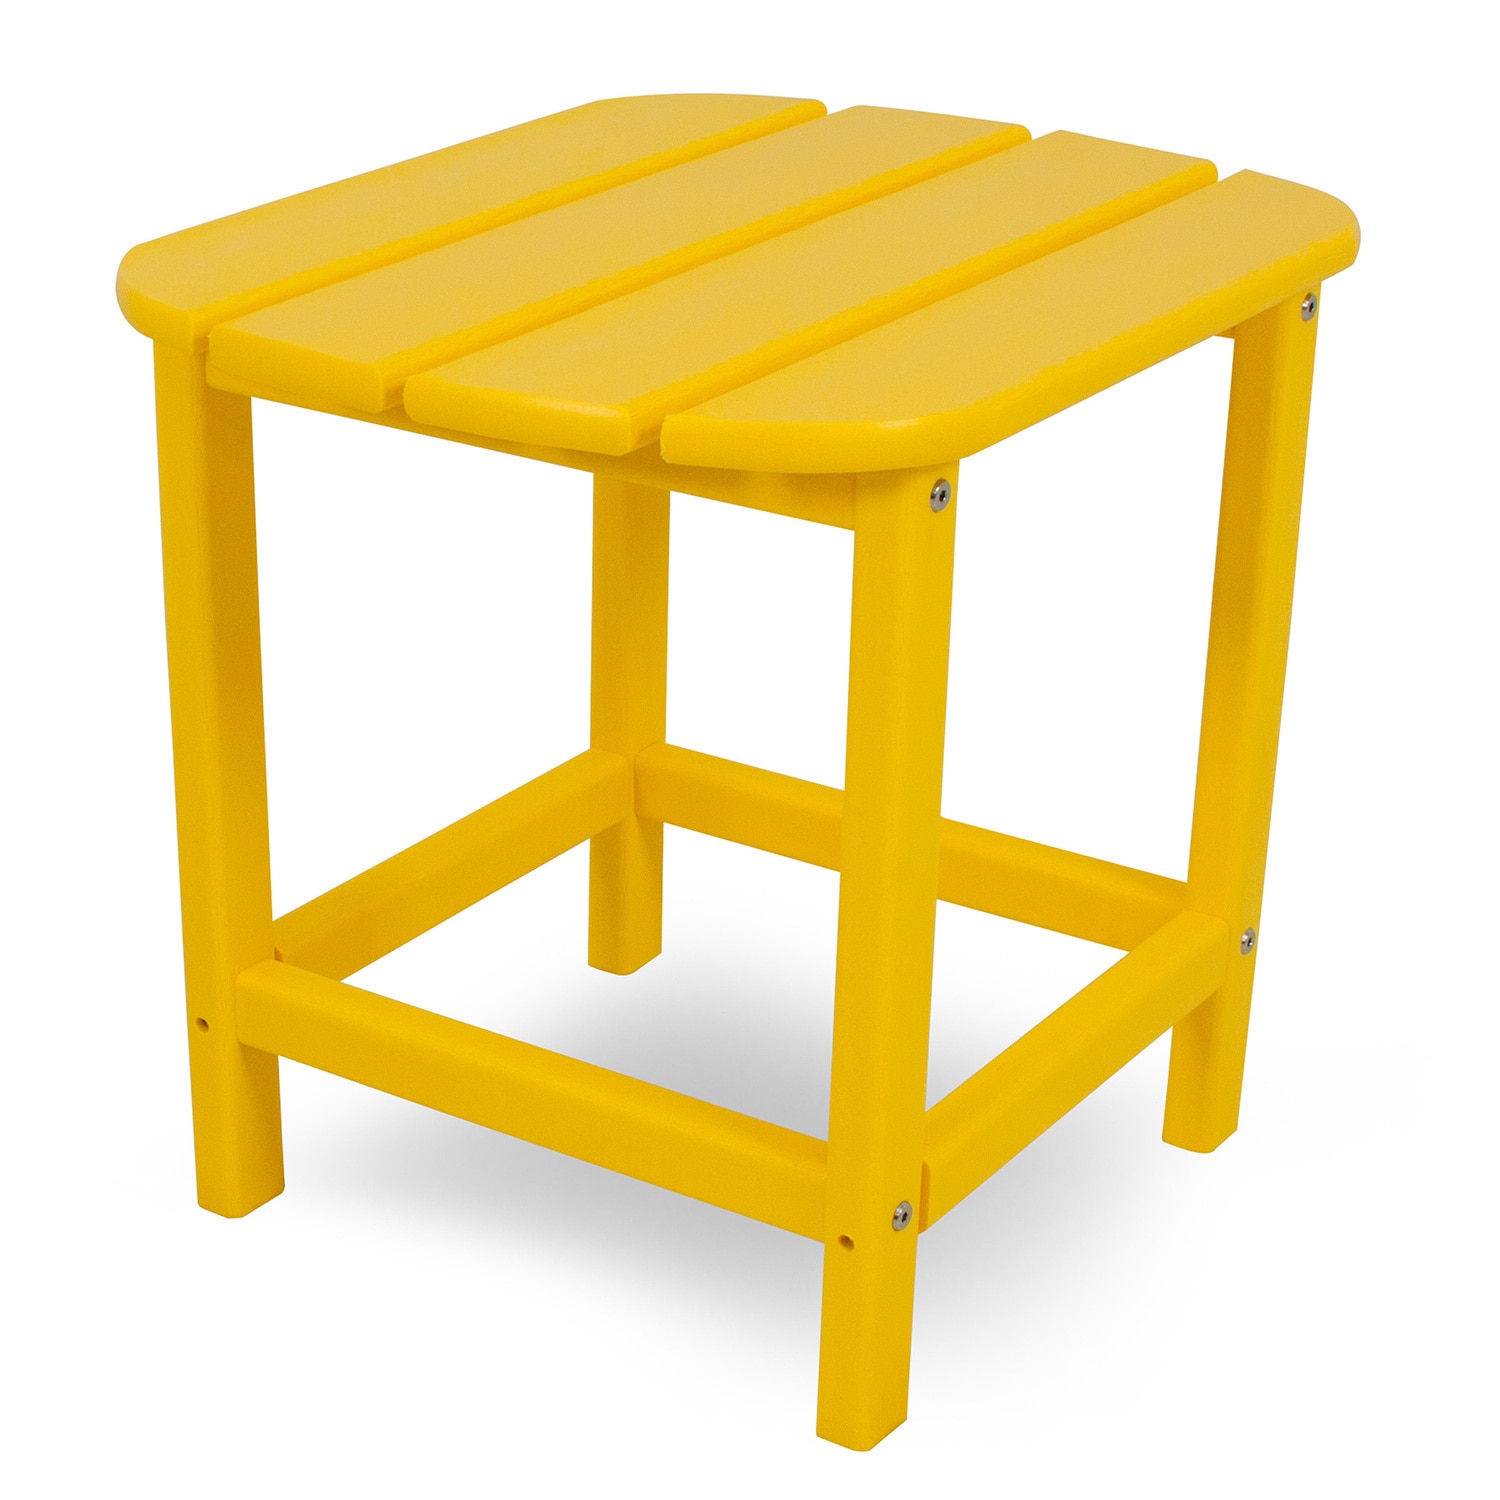 polywood south beach inch outdoor side table pacific blue yellow lemon patio furniture wrought iron end tables with glass tops farmhouse seats round dining leaf nate berkus marble